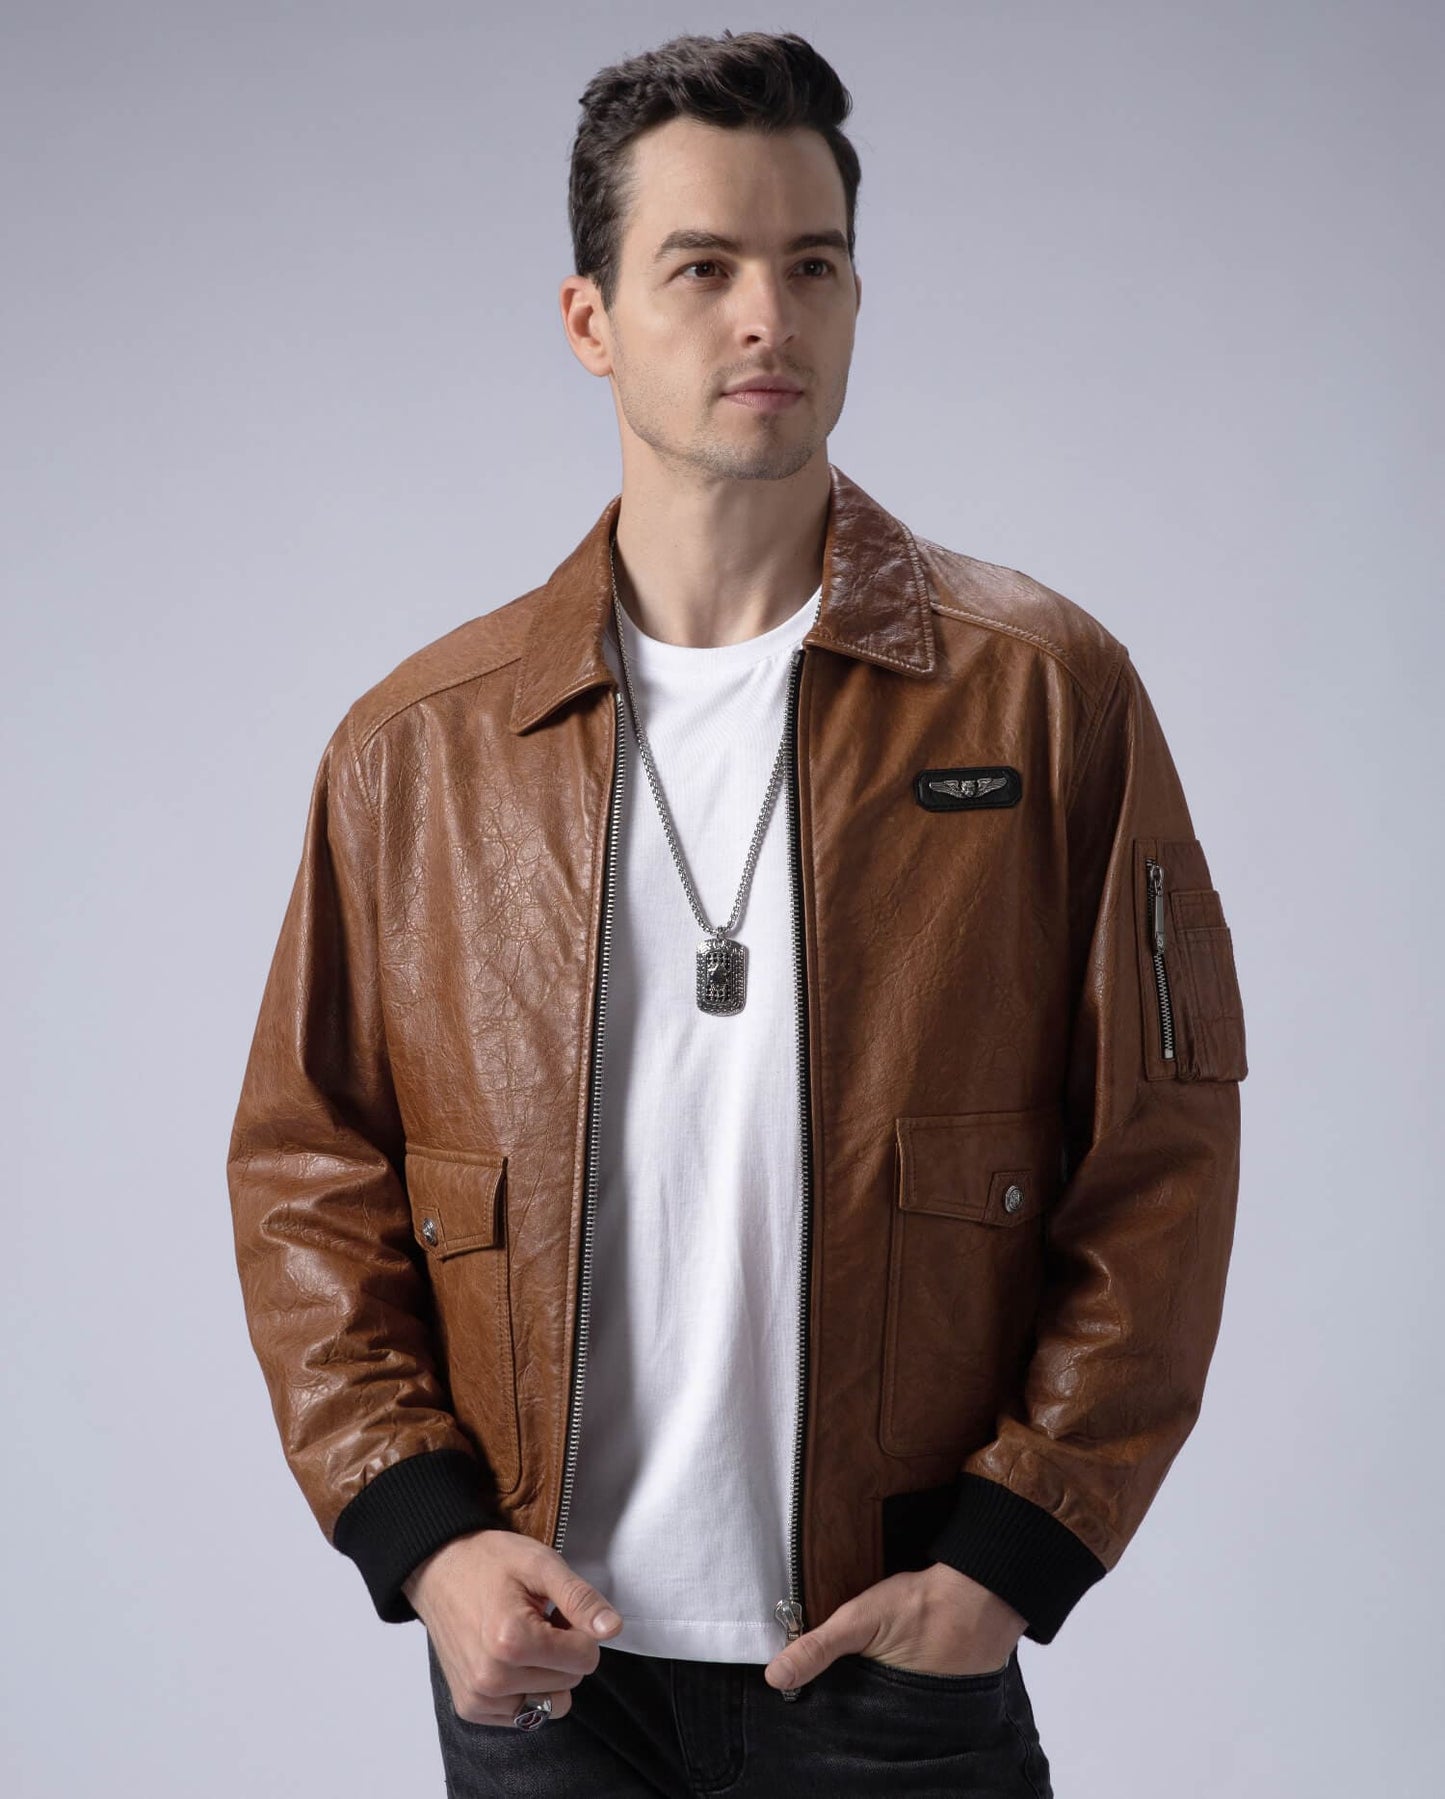 Men's Bomber Jacket Air Force A-2 Leather Flight Jacket (Multi colors available)